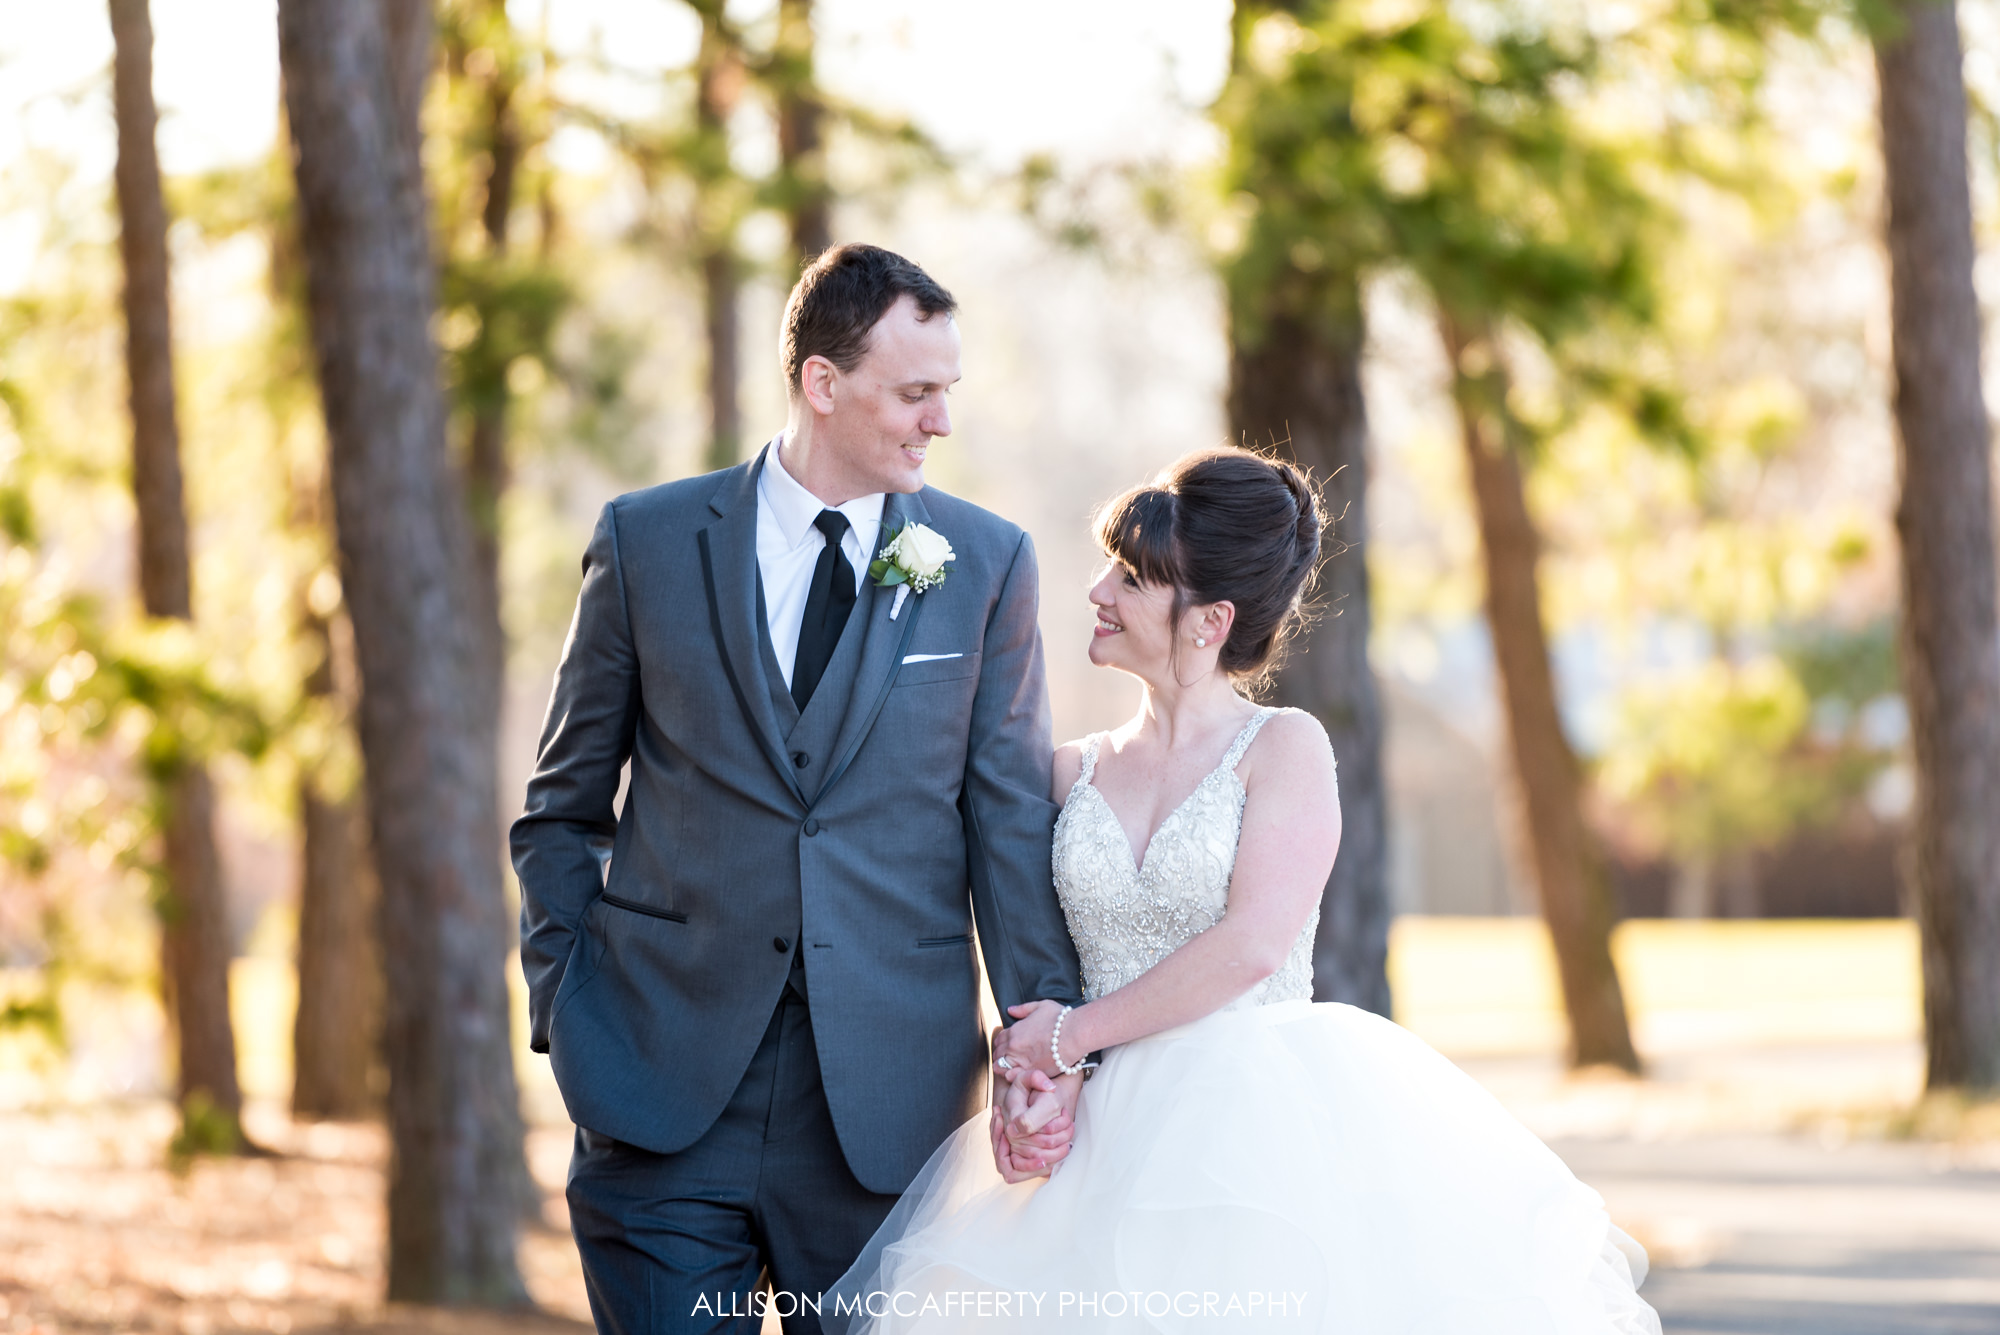 Bride and Groom outside by pine trees